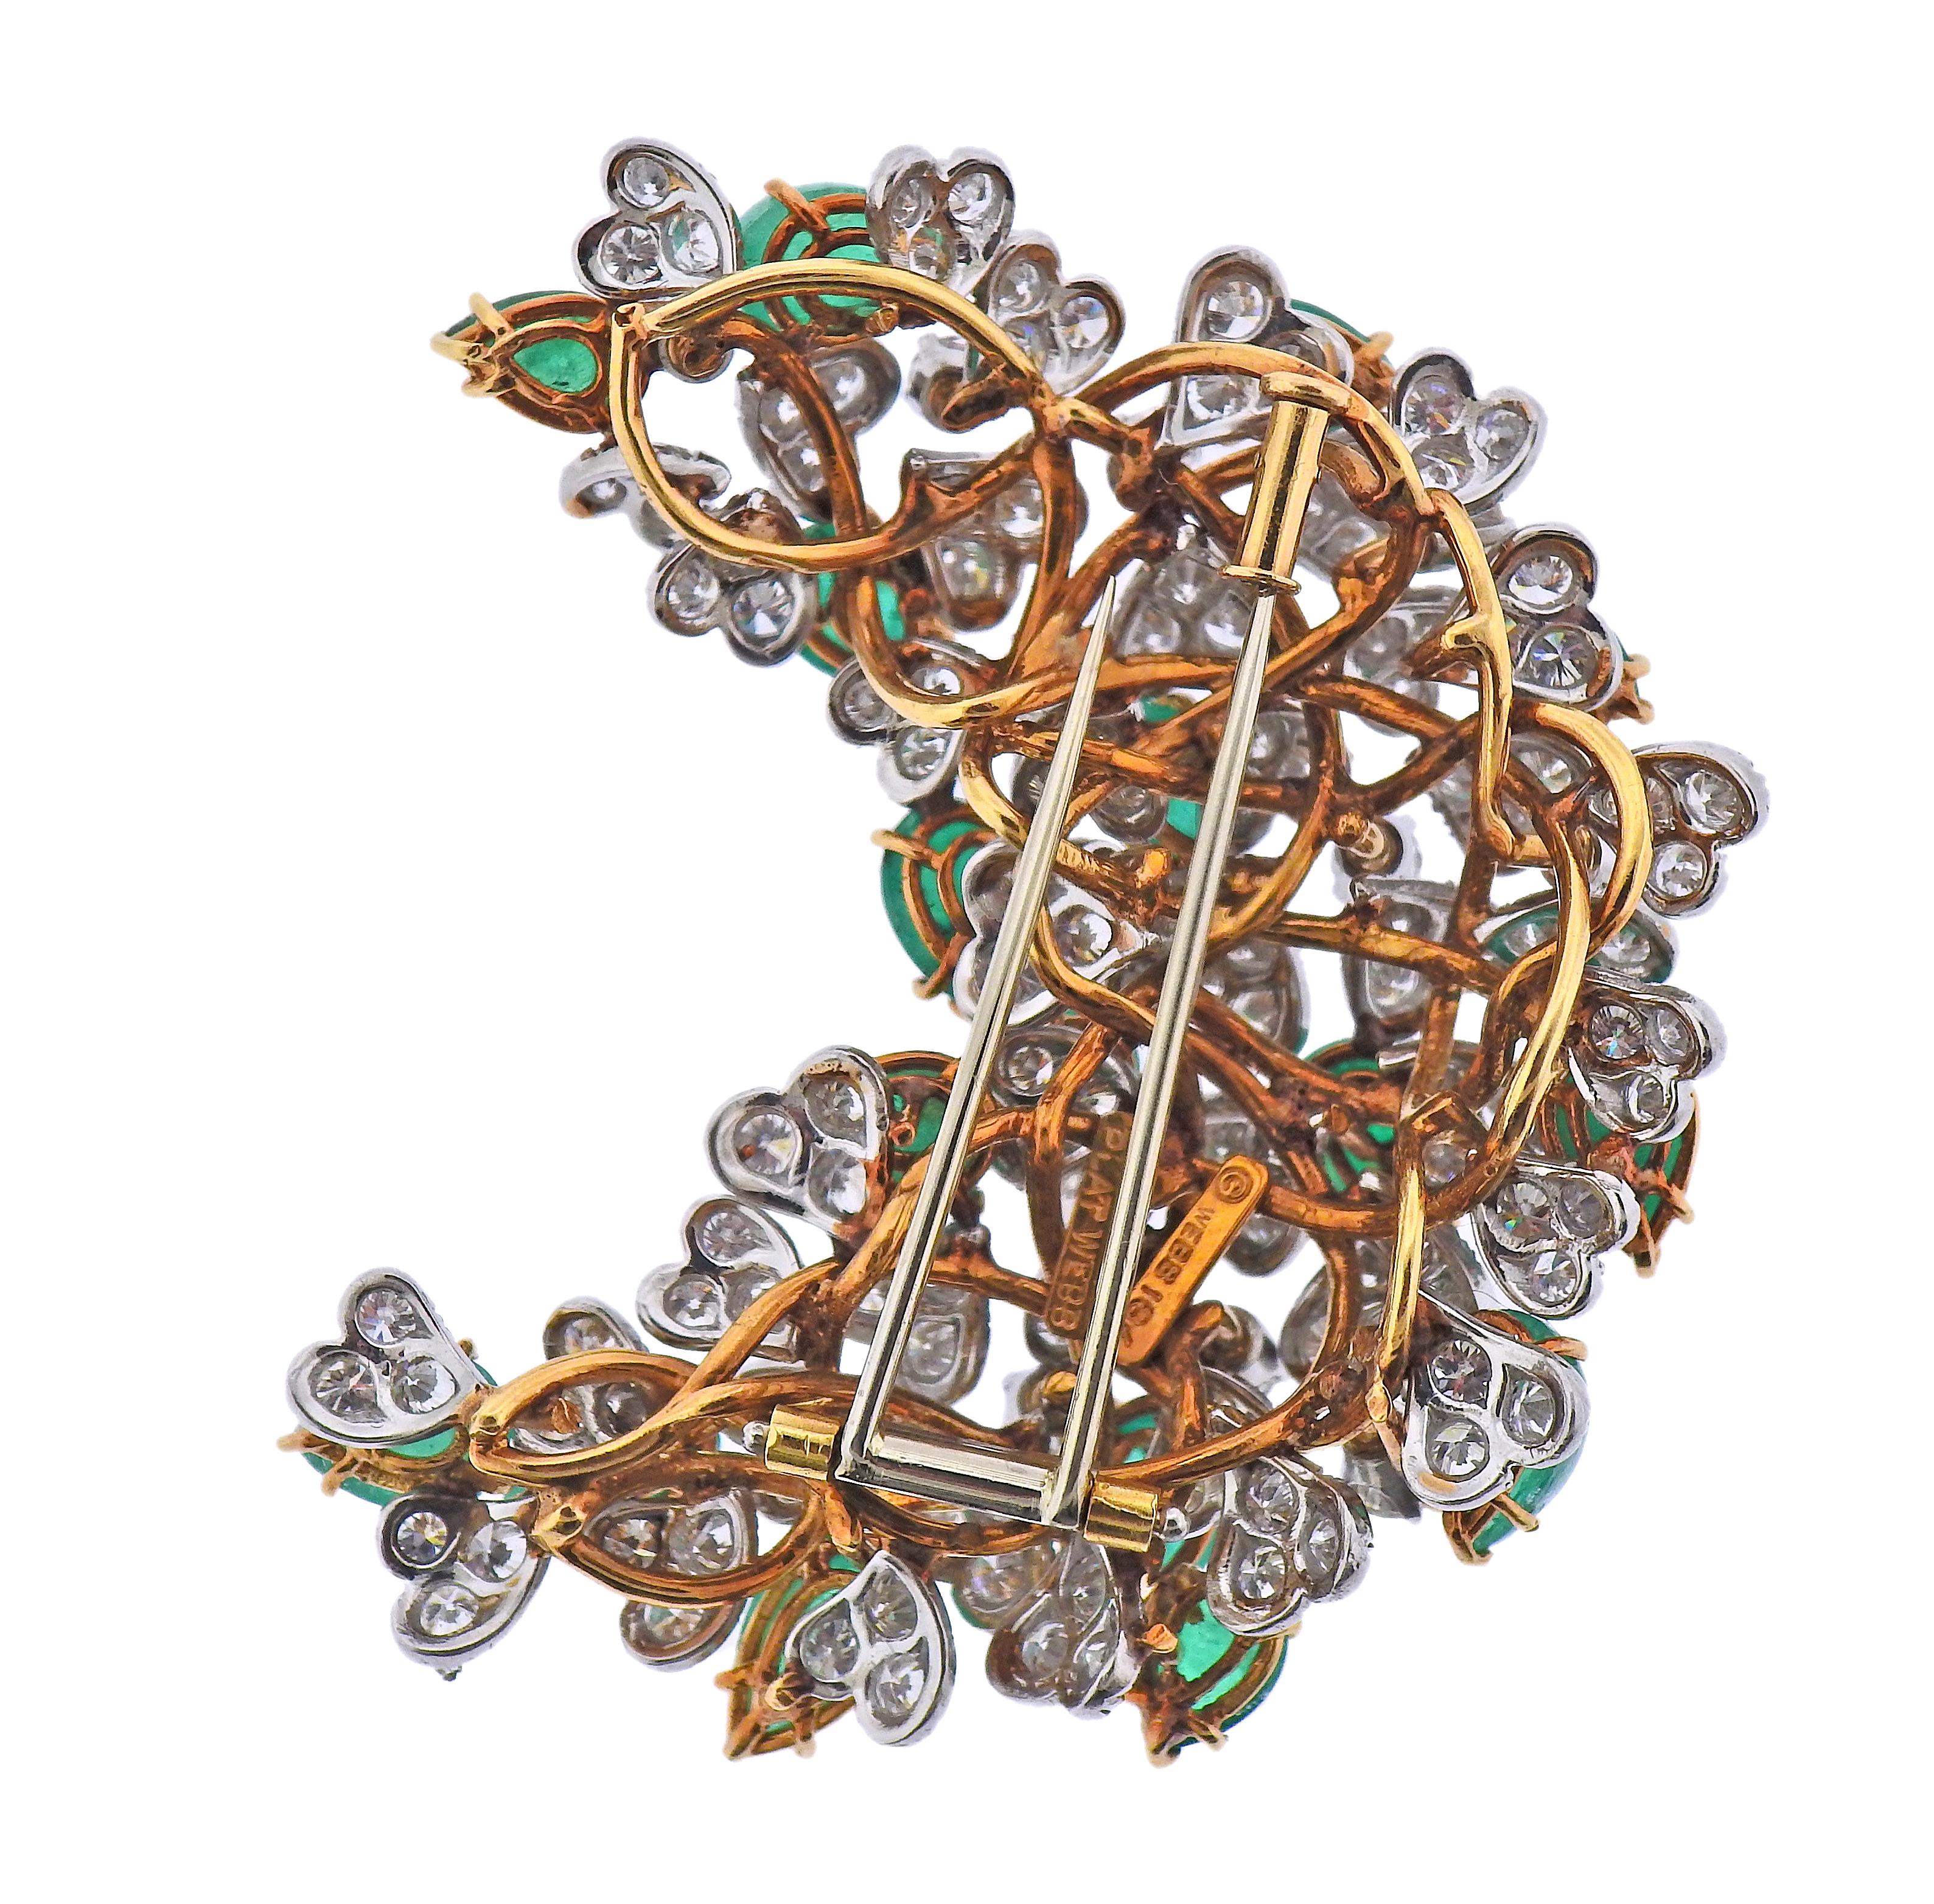 David Webb 18k yellow gold and platinum brooch, decorated with pear shaped emerald cabochons (17 stones), surrounded with approx. 7 carats in diamonds. Brooch measures 2